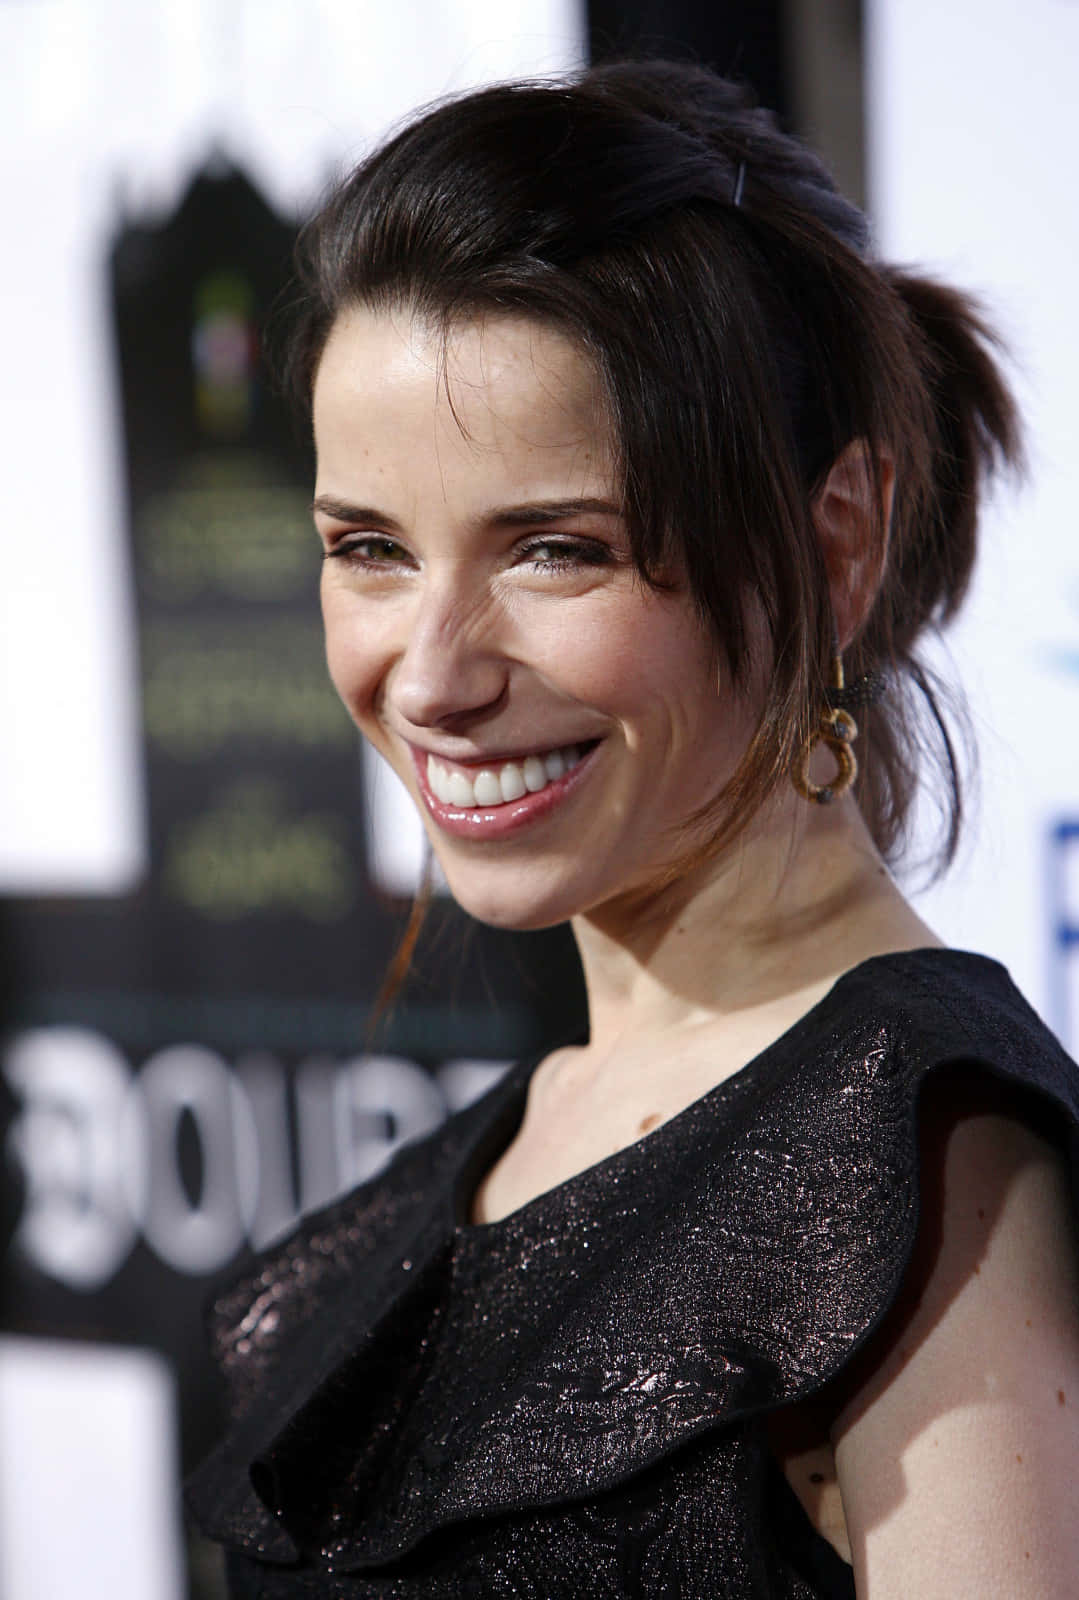 British Actress Sally Hawkins At A Red Carpet Event Wallpaper